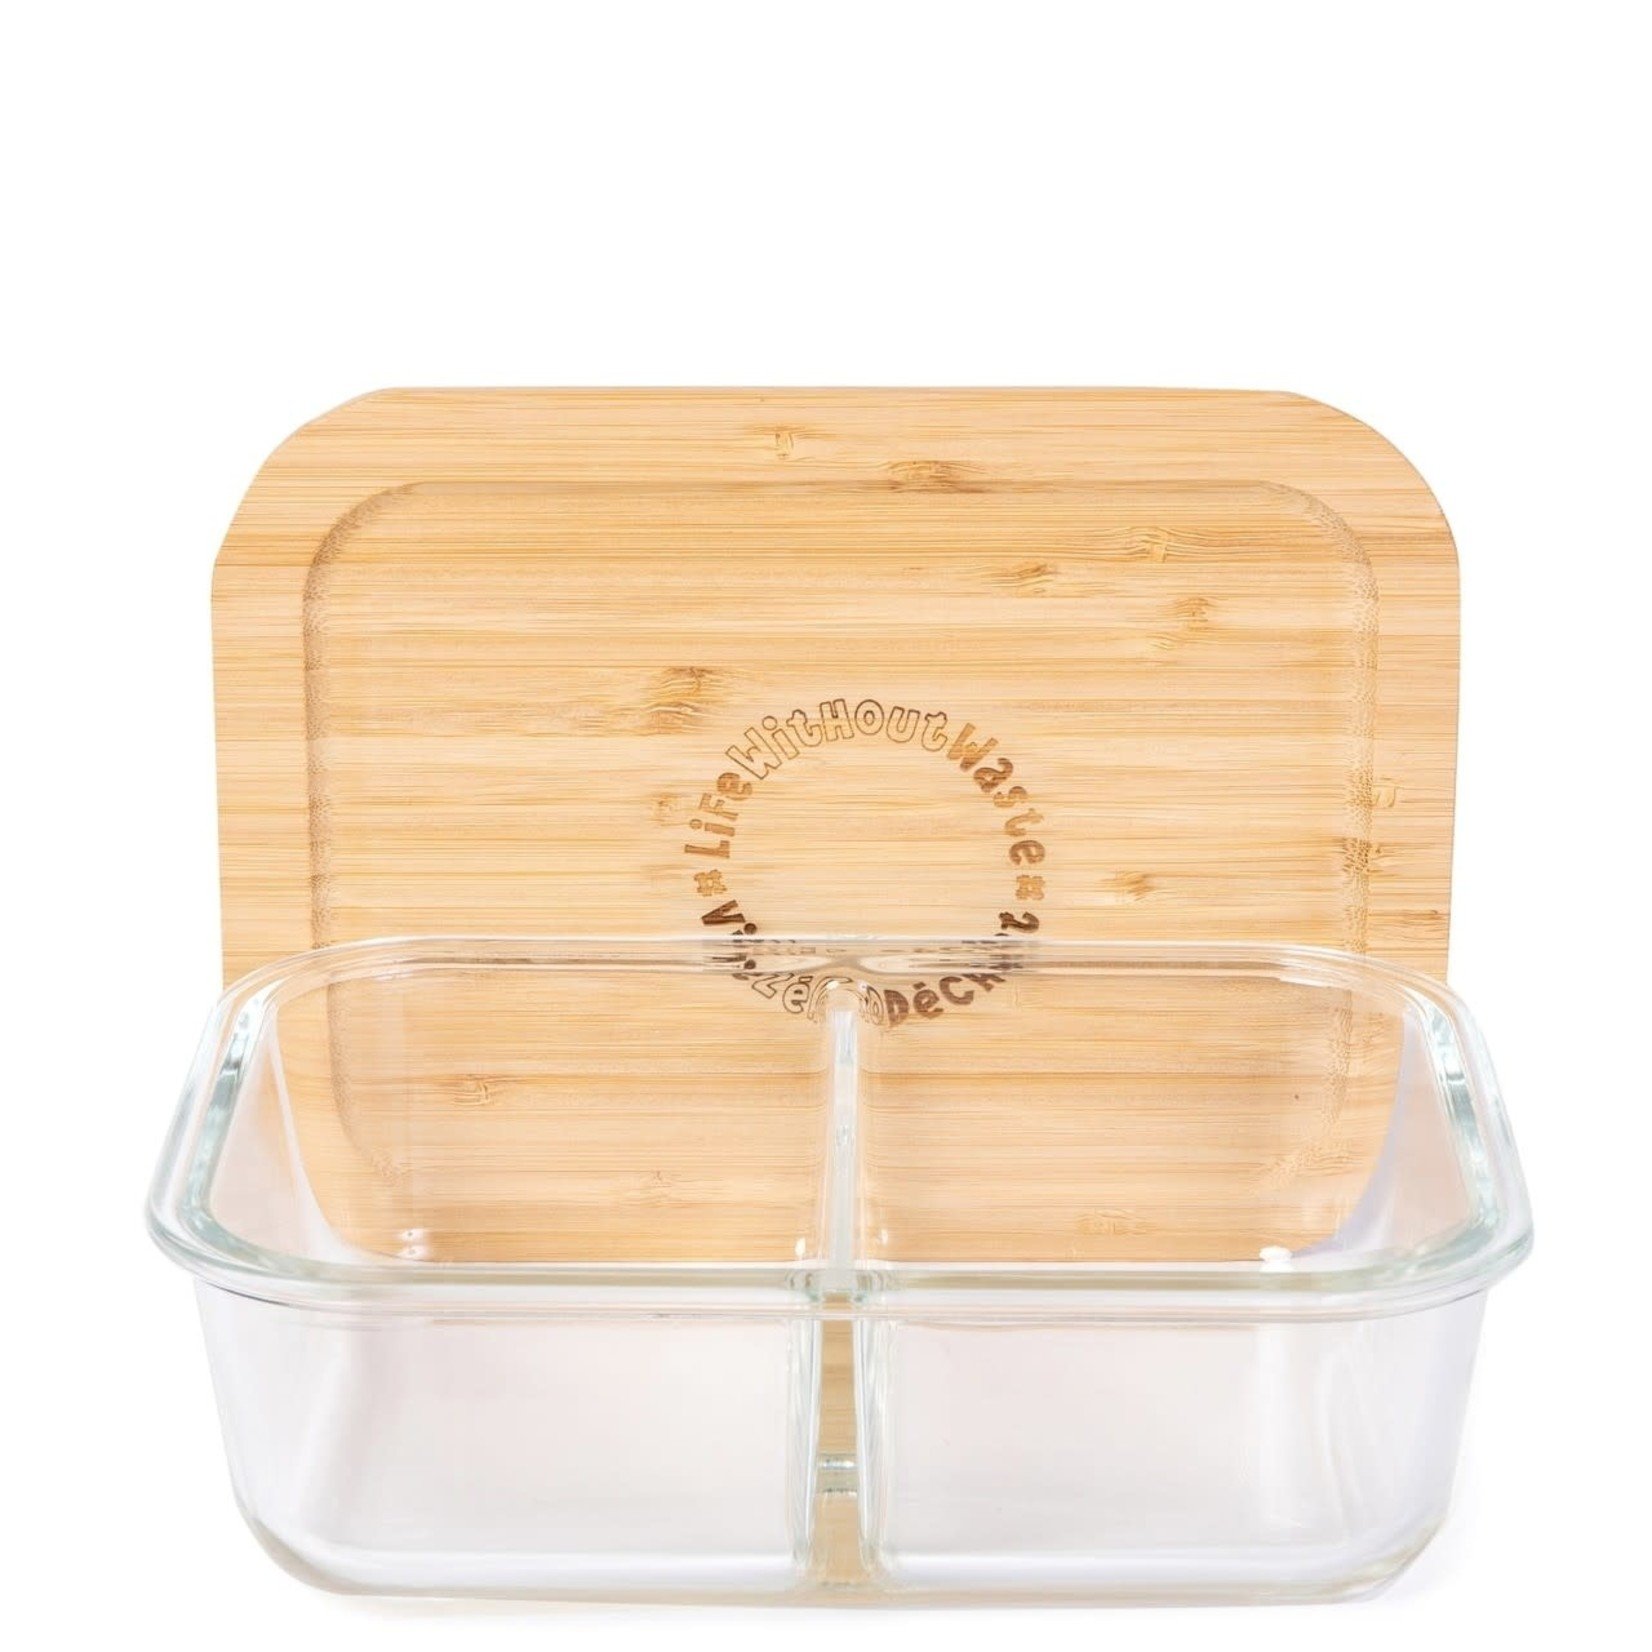 LIFE WITHOUT WASTE DIVIDED GLASS CONTAINER - SMALL 2 COMPARTMENT